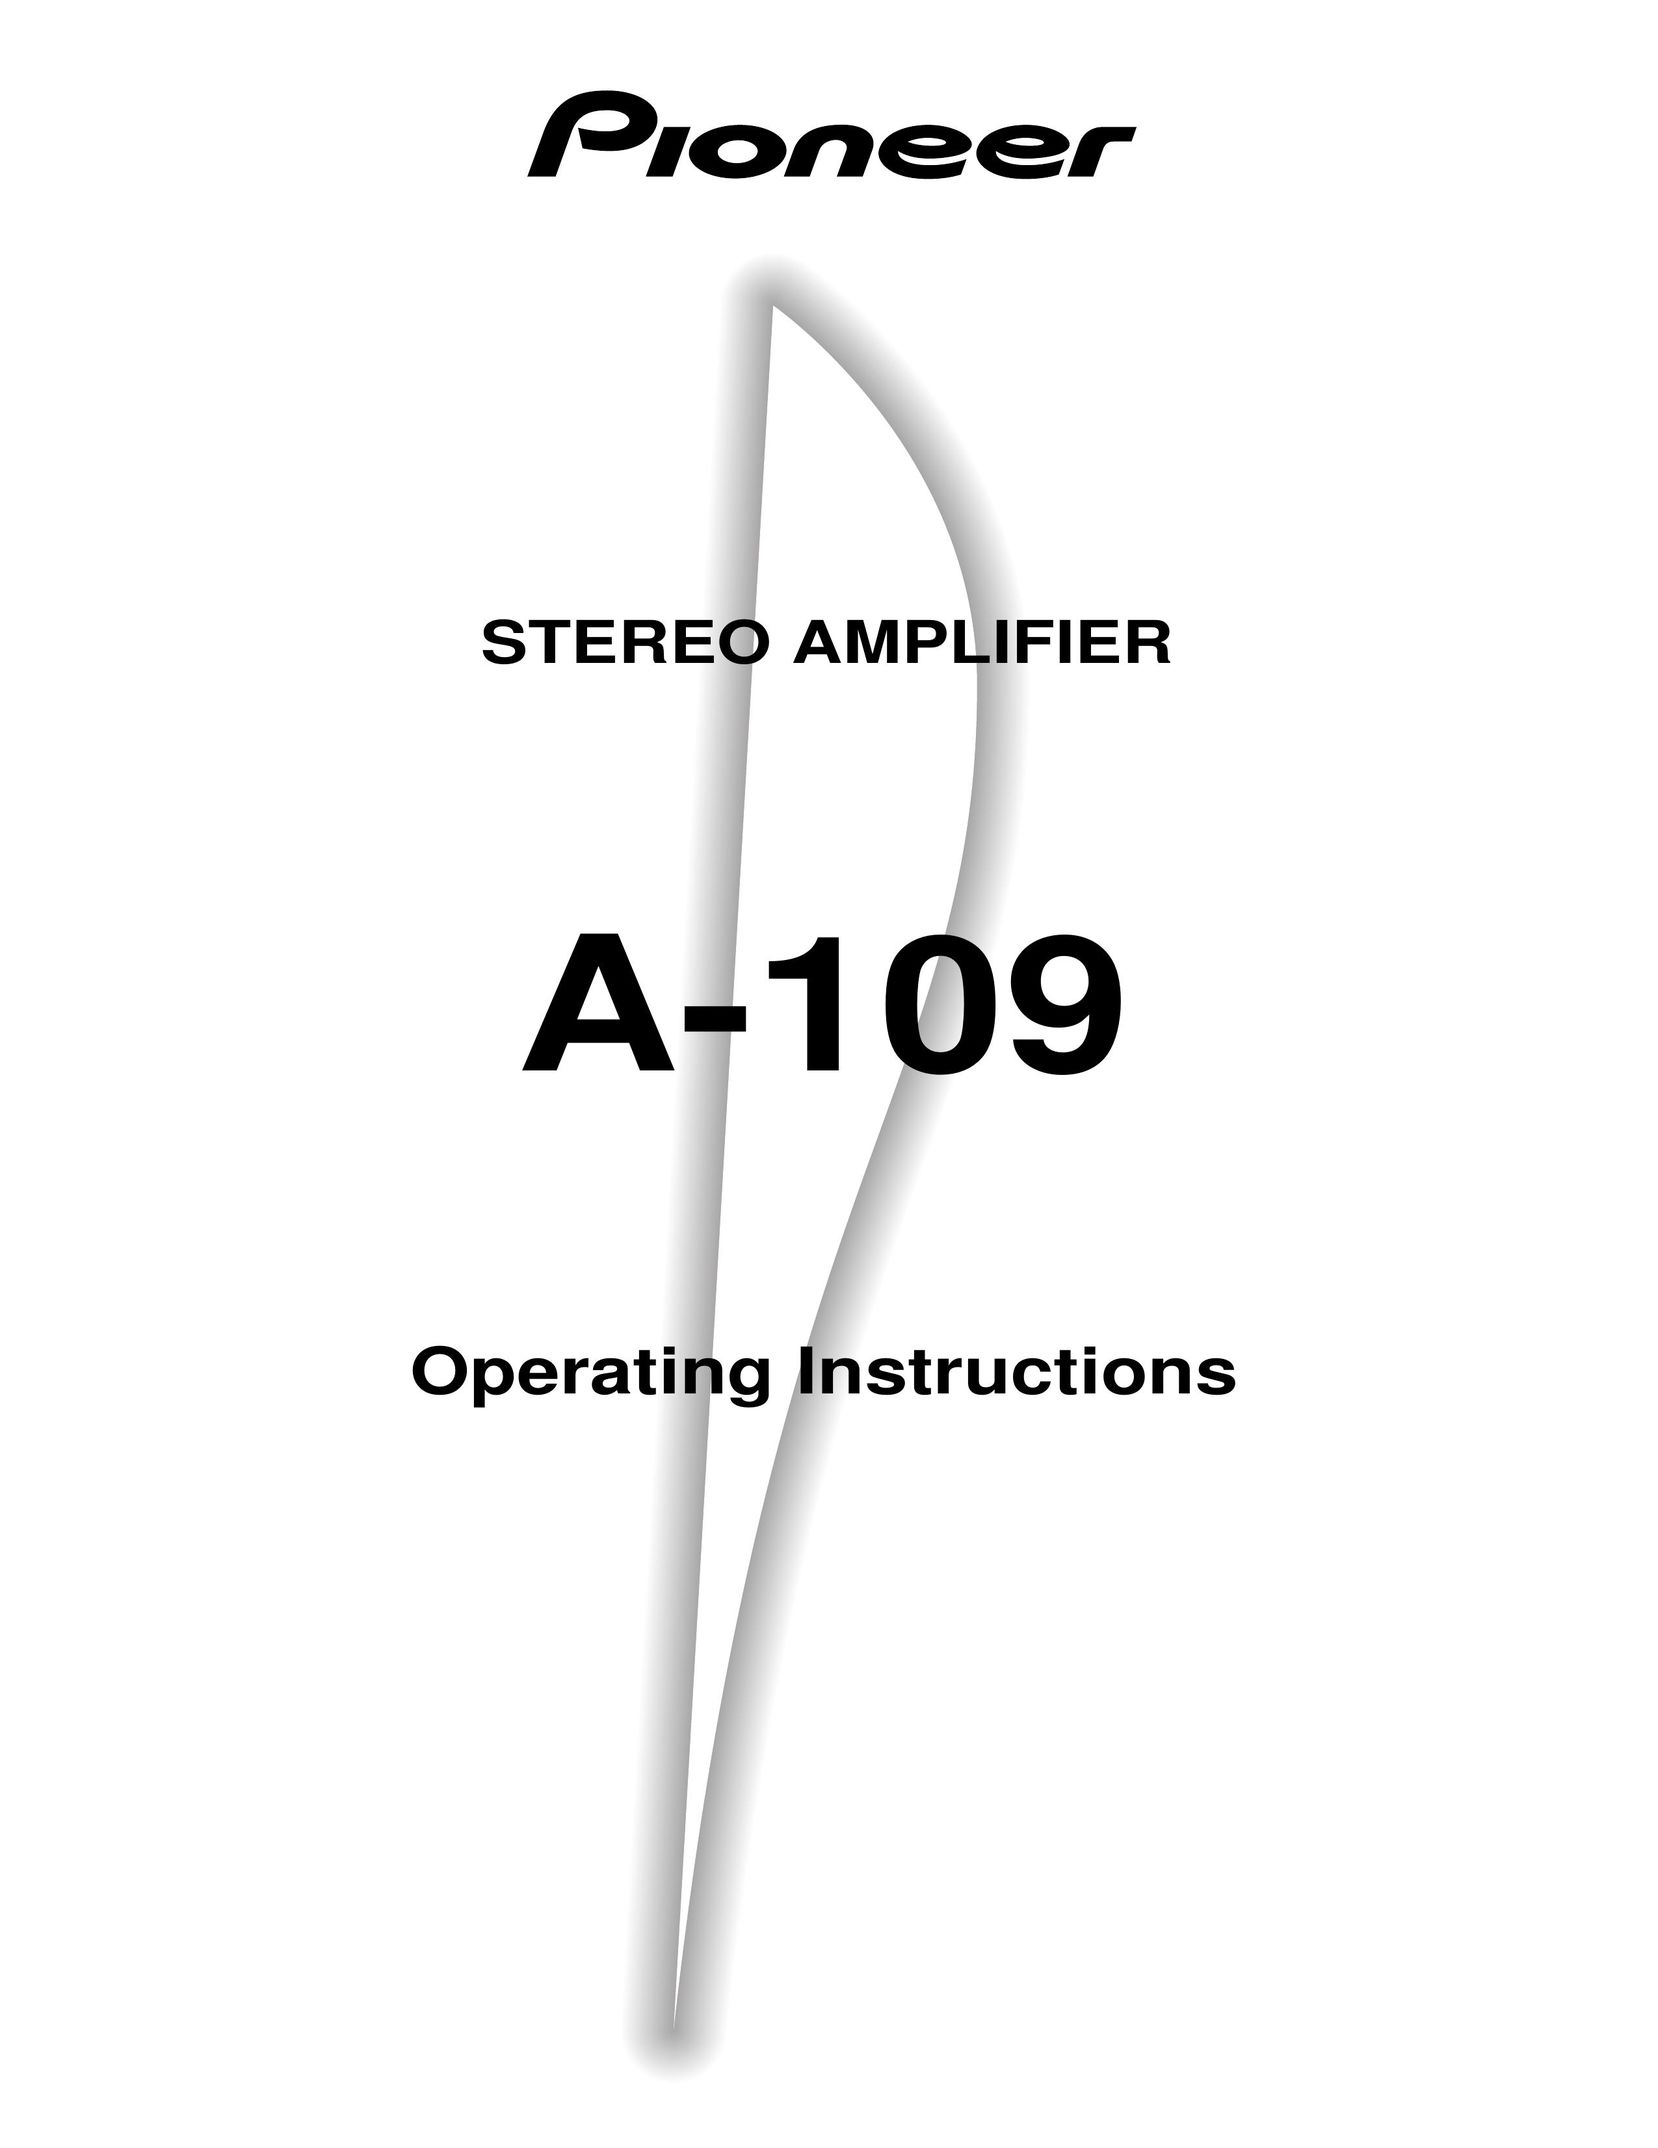 Pioneer A-109 Stereo Amplifier User Manual